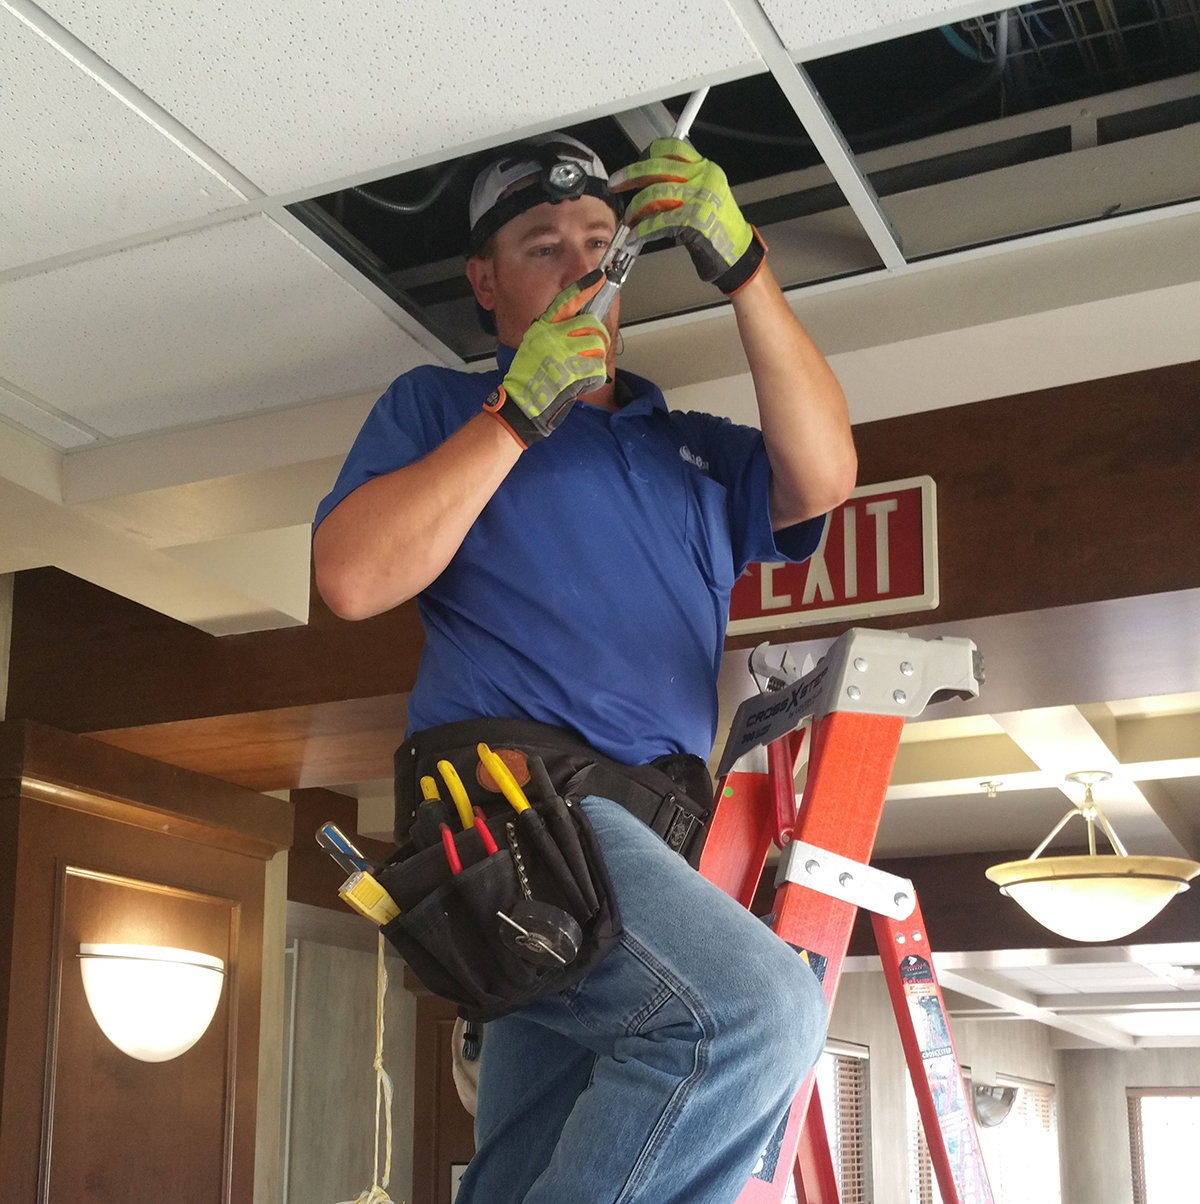 Jordan Brown working in the ceiling, preparing to install equipment to feed the Green wing